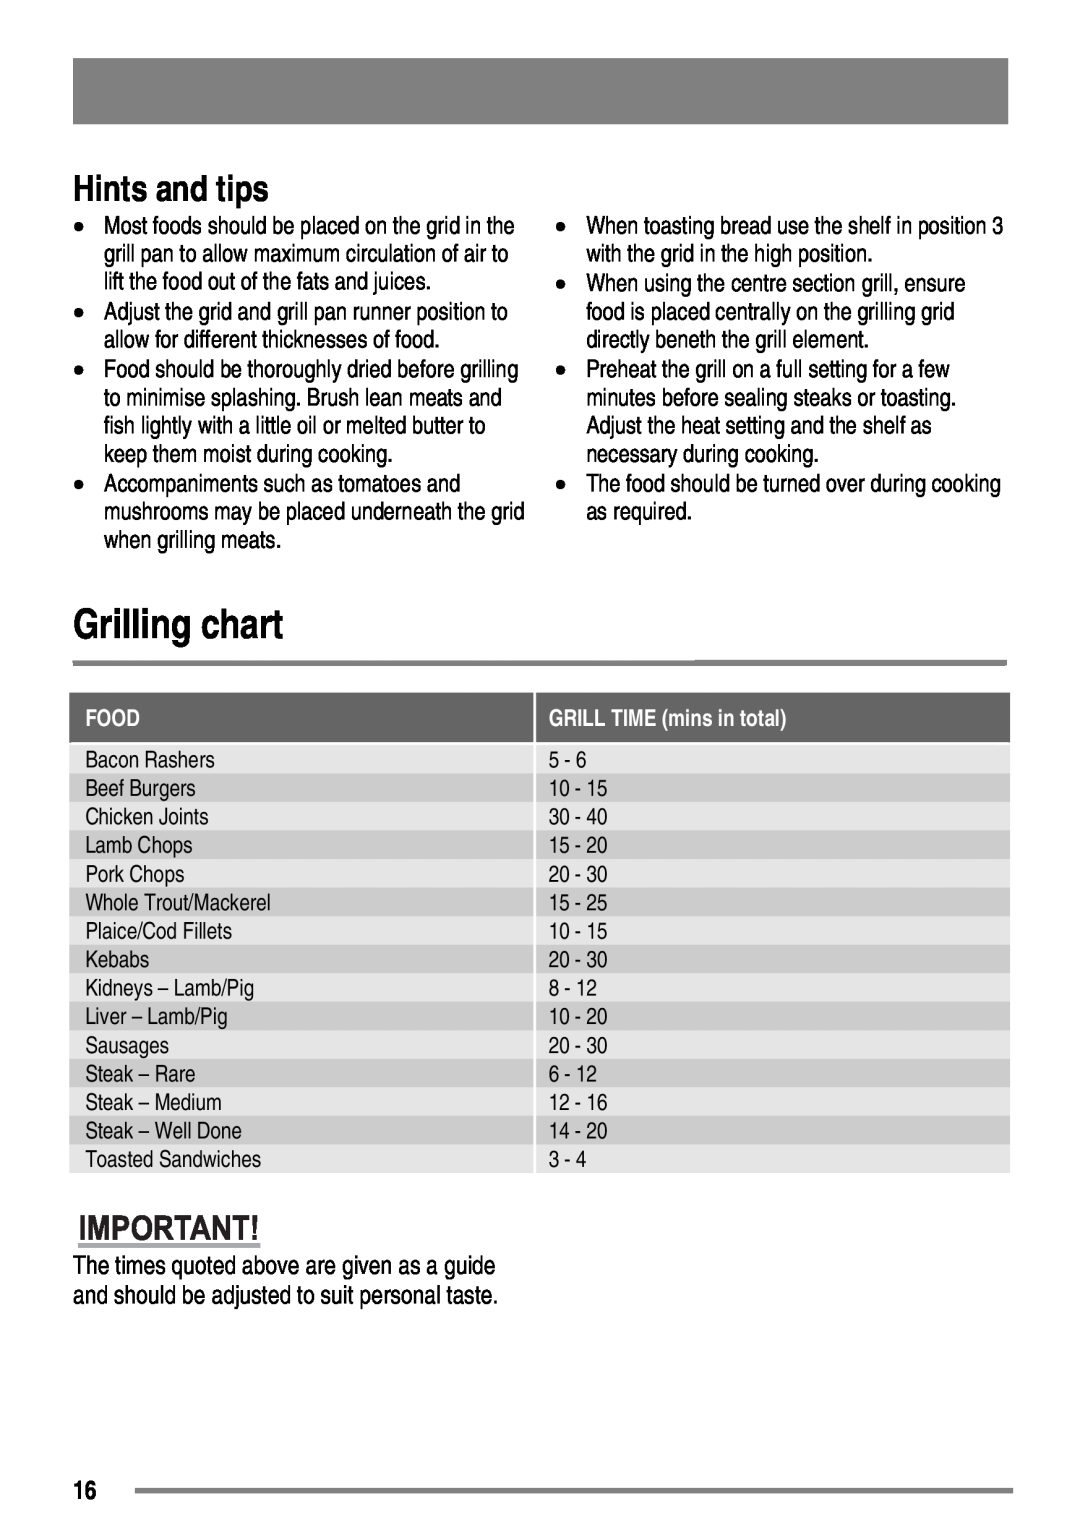 Zanussi ZKC6040 user manual Grilling chart, Hints and tips, Food, GRILL TIME mins in total 